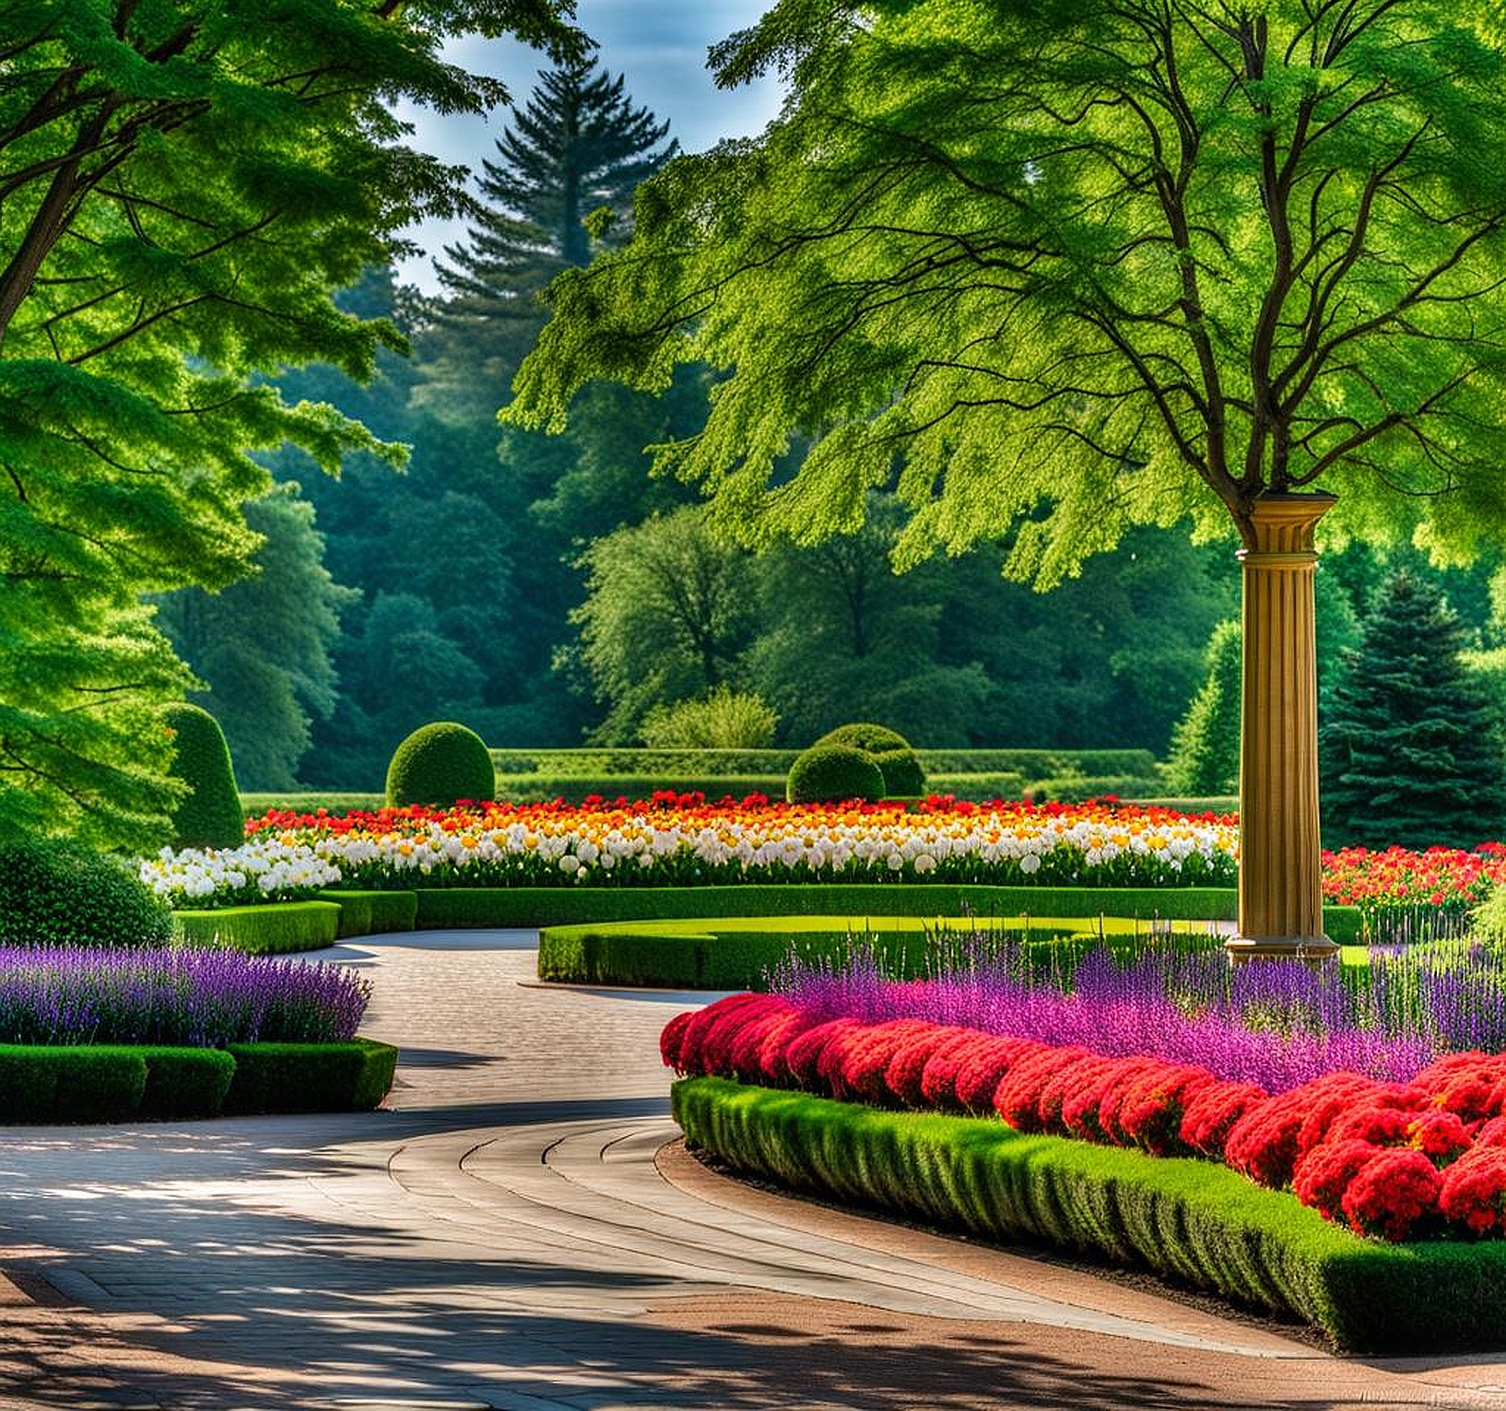 Experience the Beauty of Longwood Gardens in Varied Weather Conditions